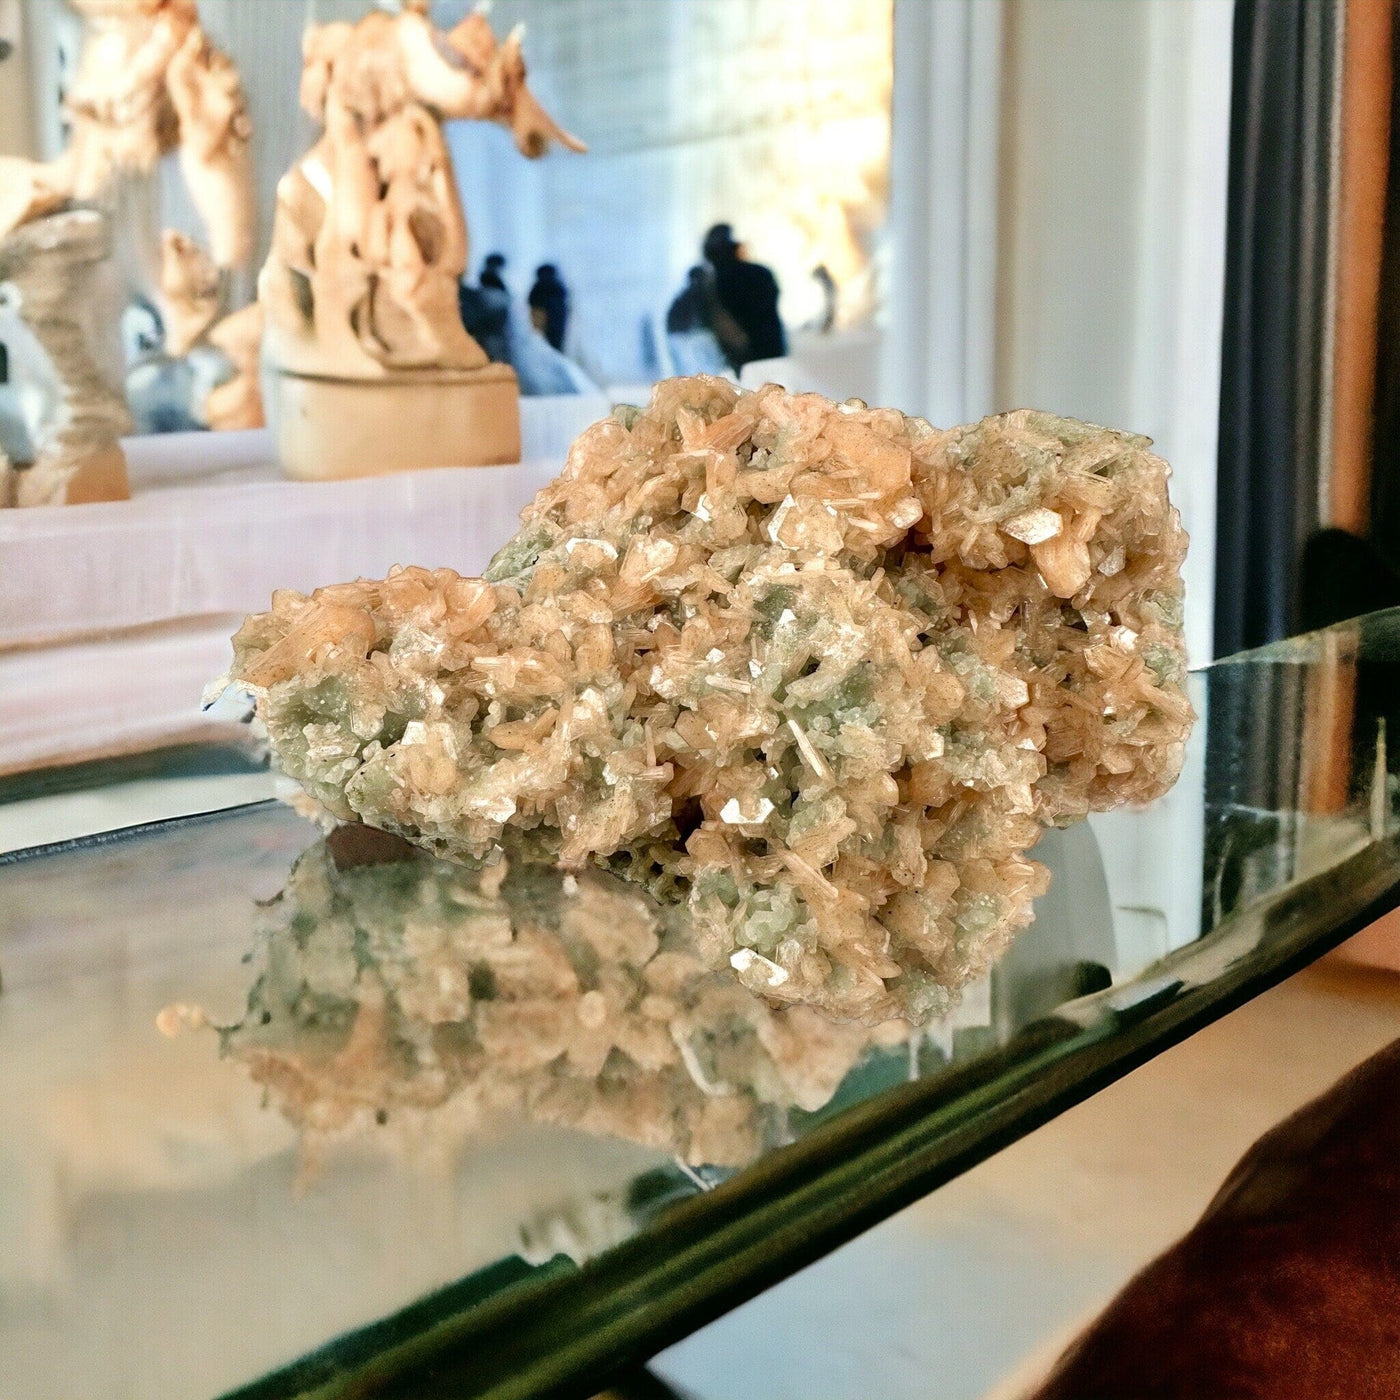 Peach Stilbite Cluster with Apophyllite and Zeolite - Museum Quality on a glass surface with marble statues in the background